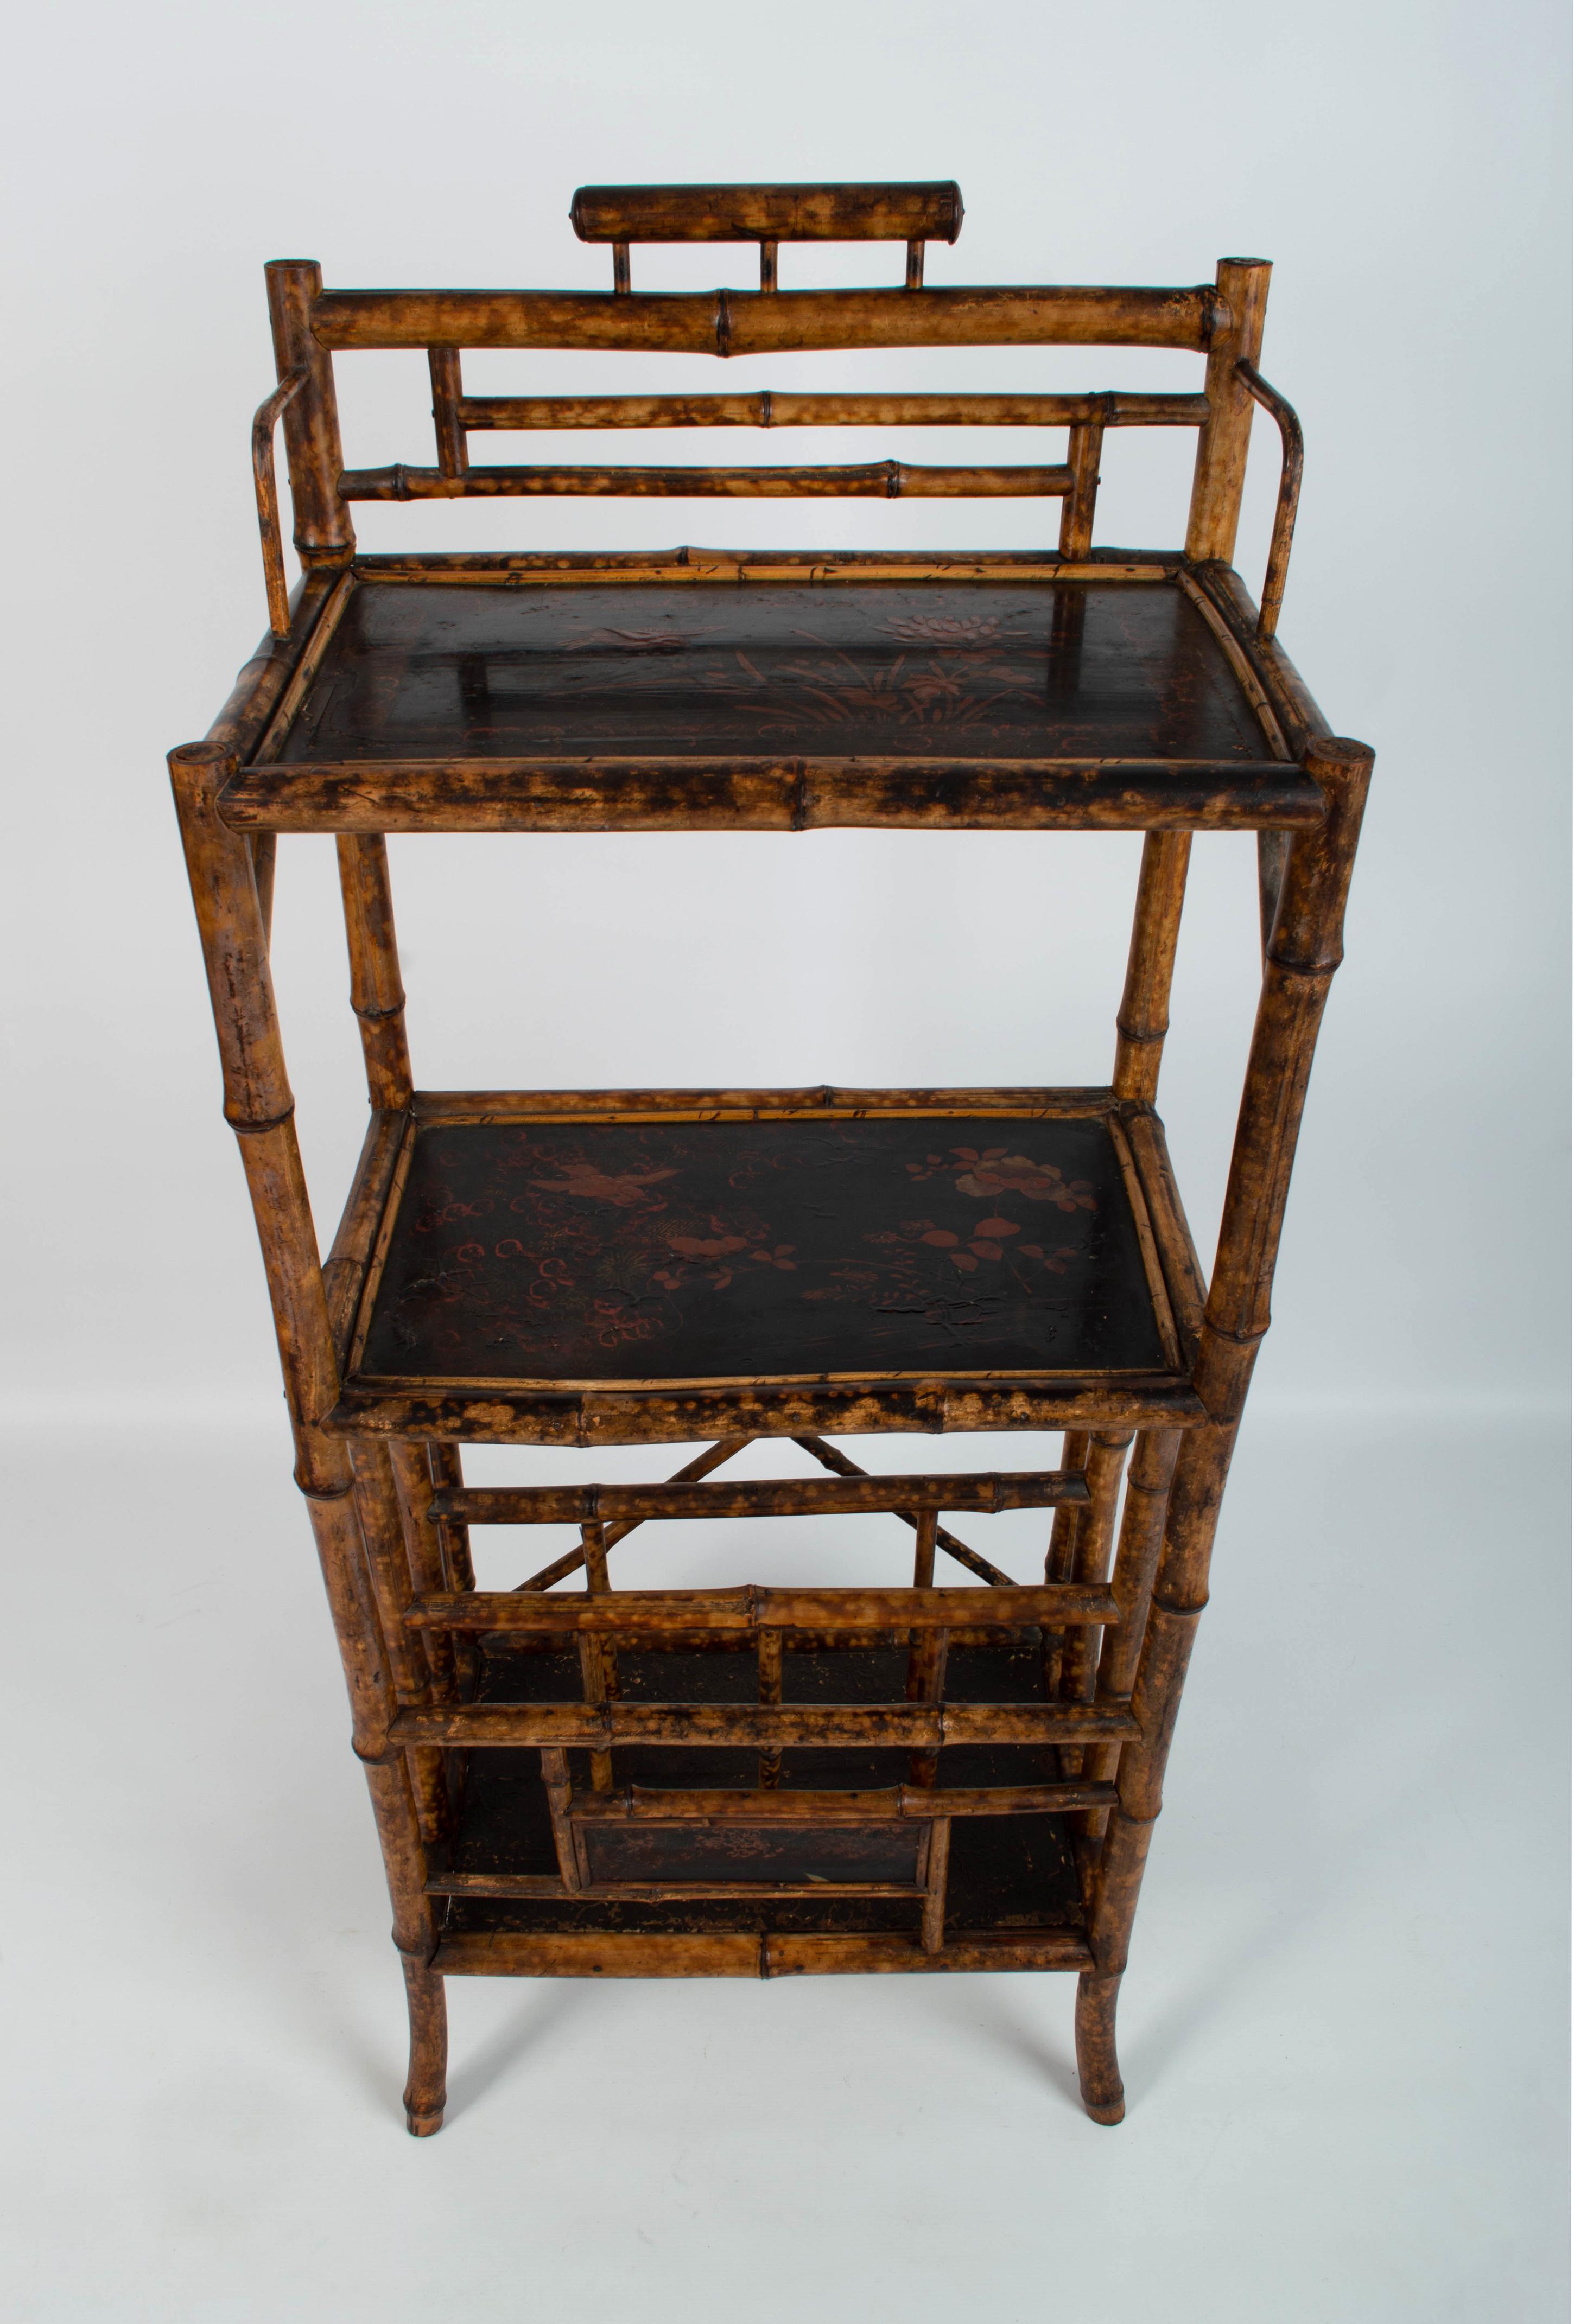 Antique 19th Century Anglo-Chinese Lacquered Bamboo Etagere Shelves, England For Sale 3